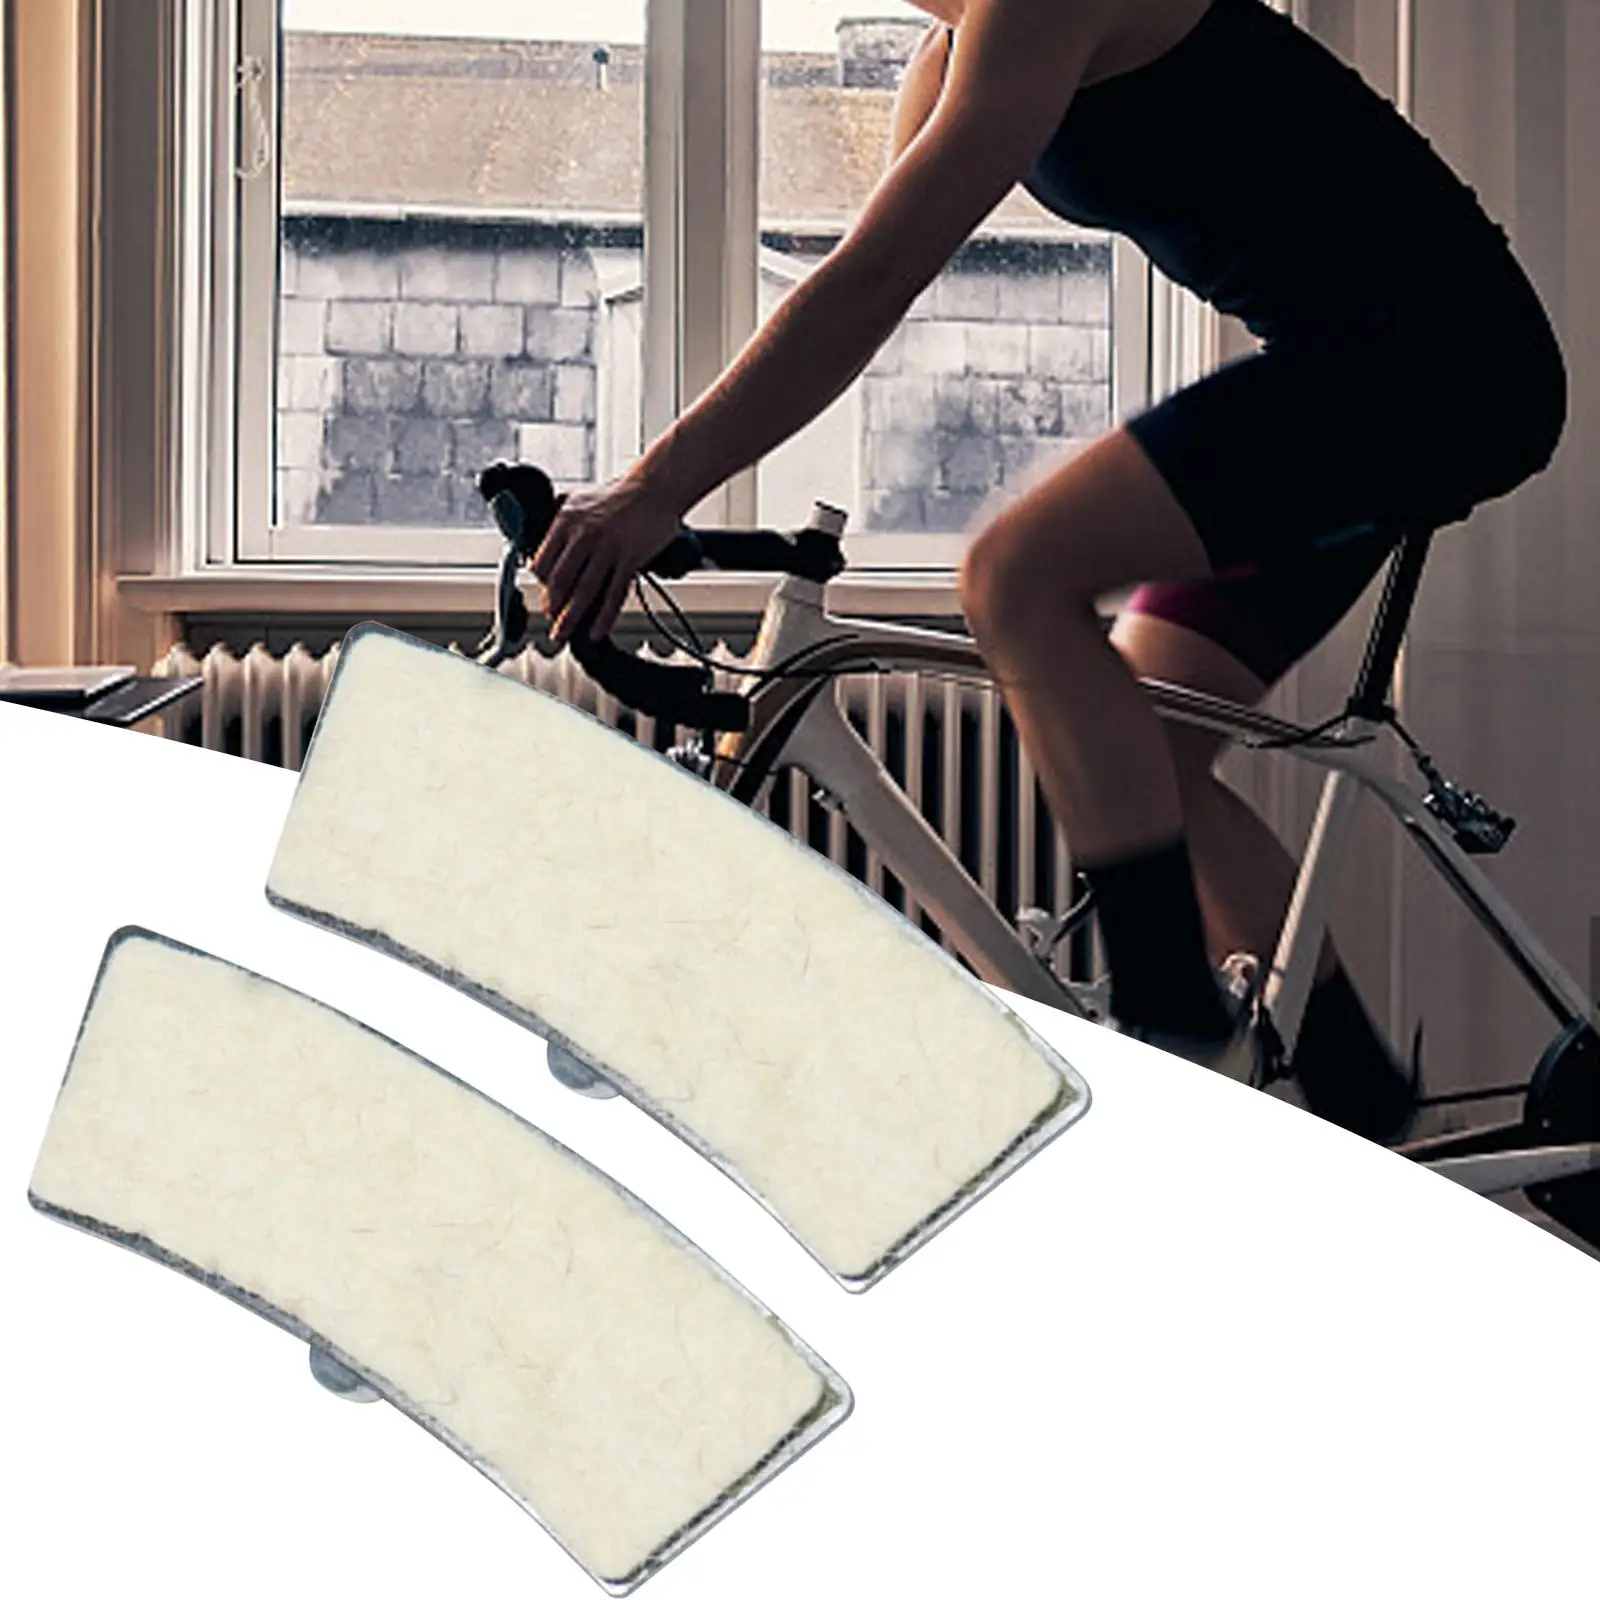 Brake Pad Direct Replaces Durable Accessory Felt Easy Installation Exercise Bike Parts Spinnings Bike Pad for Fitness Gym Home